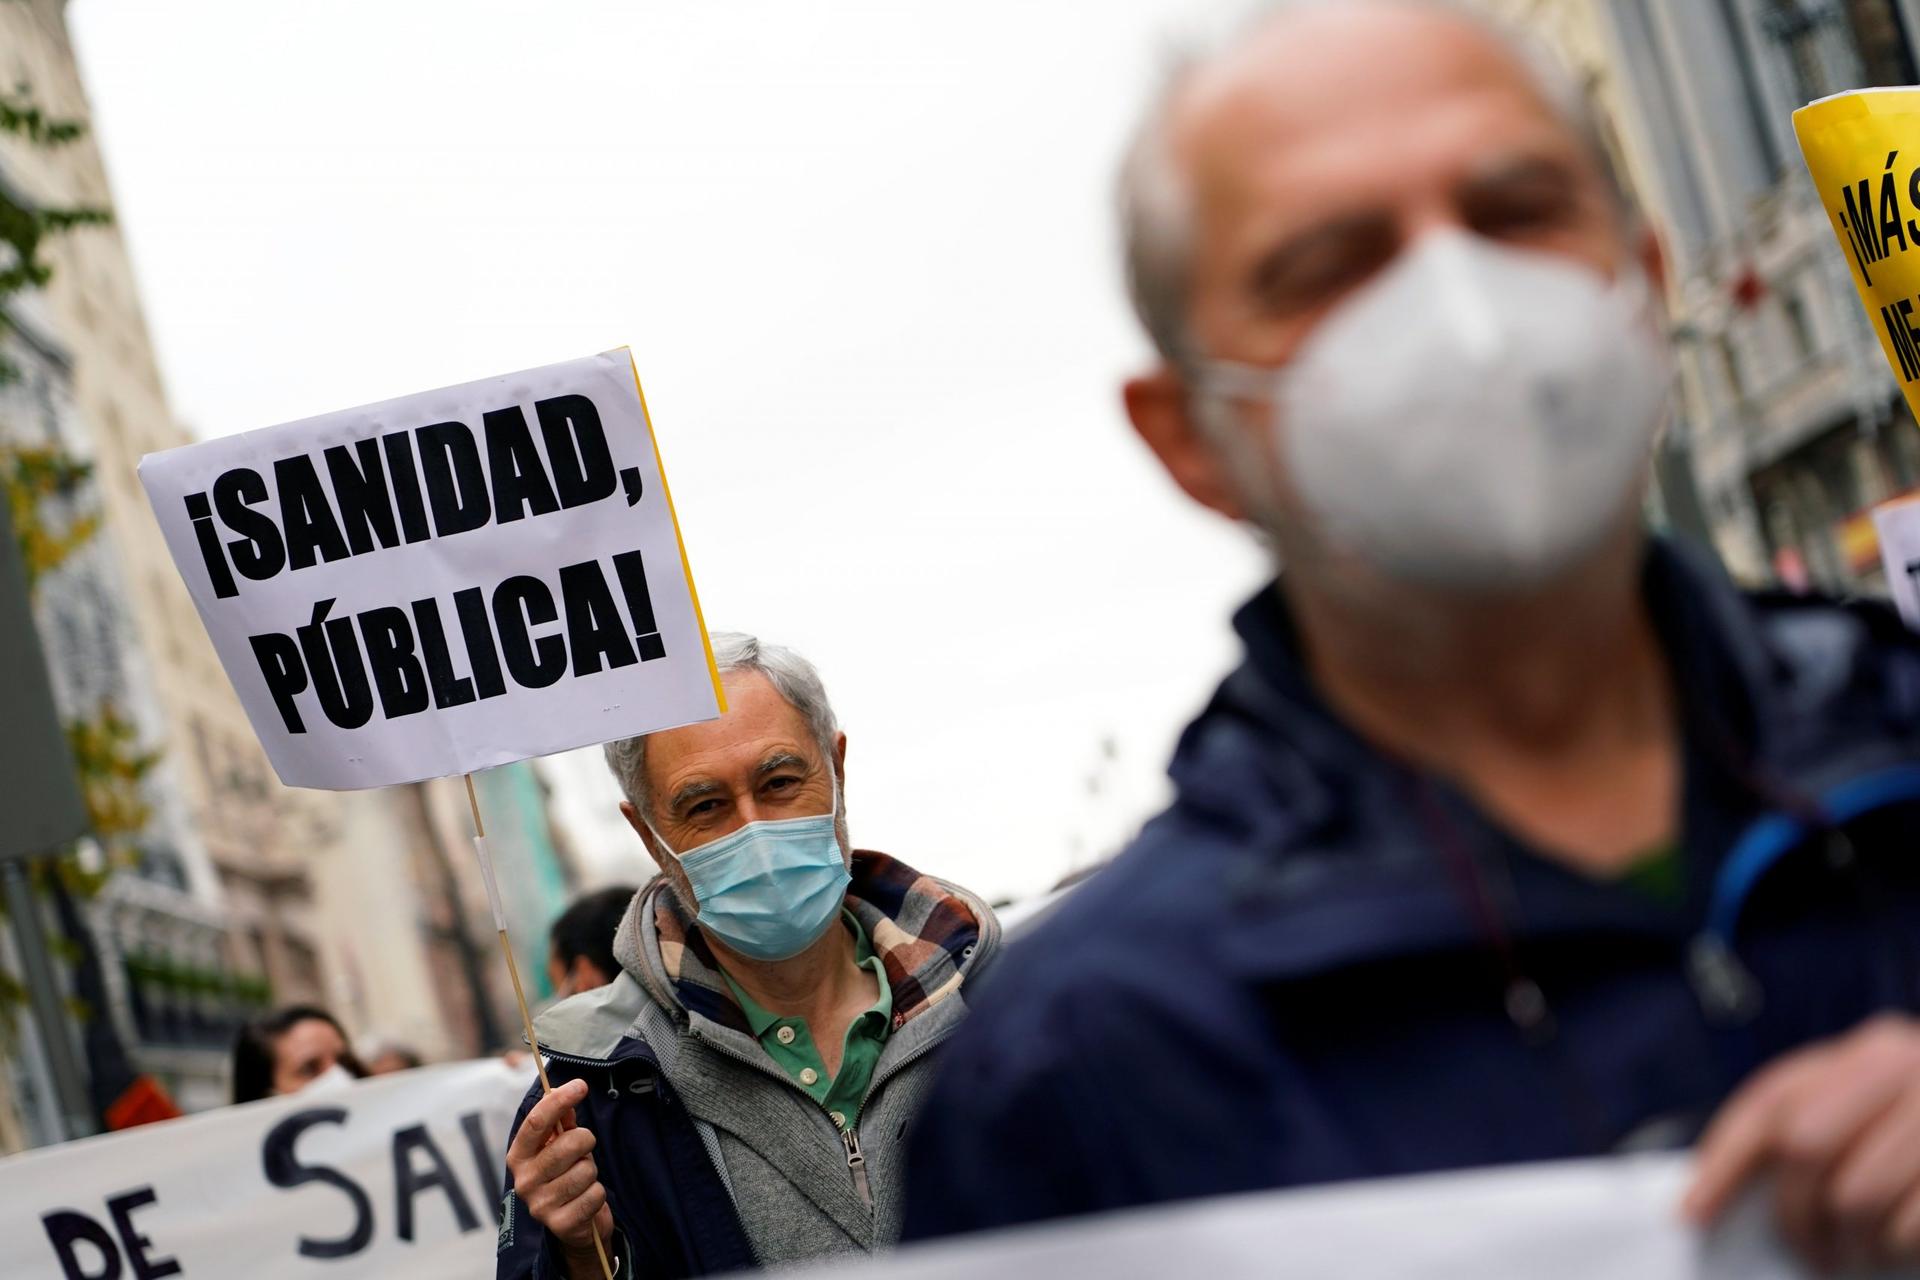 Spanish bishops, Europeans warn of economic, social wounds from pandemic